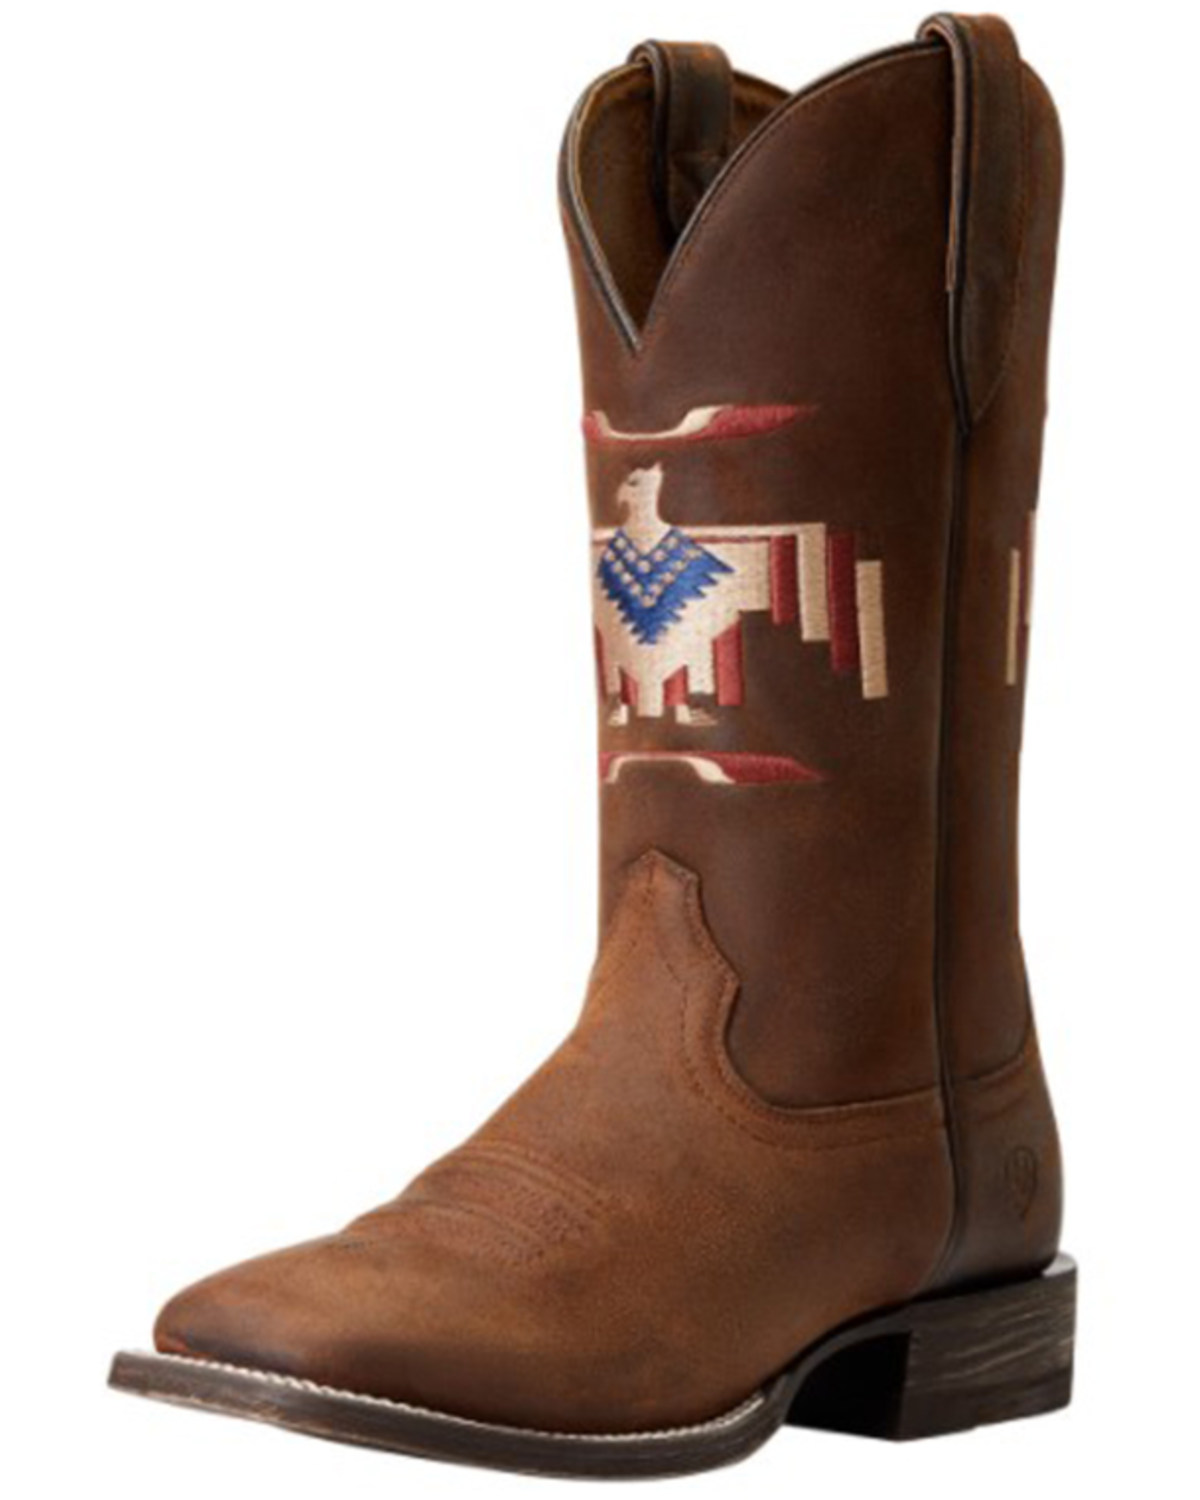 Ariat Men's Curcuit Thunderbird Chimayo Embroidered Western Boots - Broad Square Toe